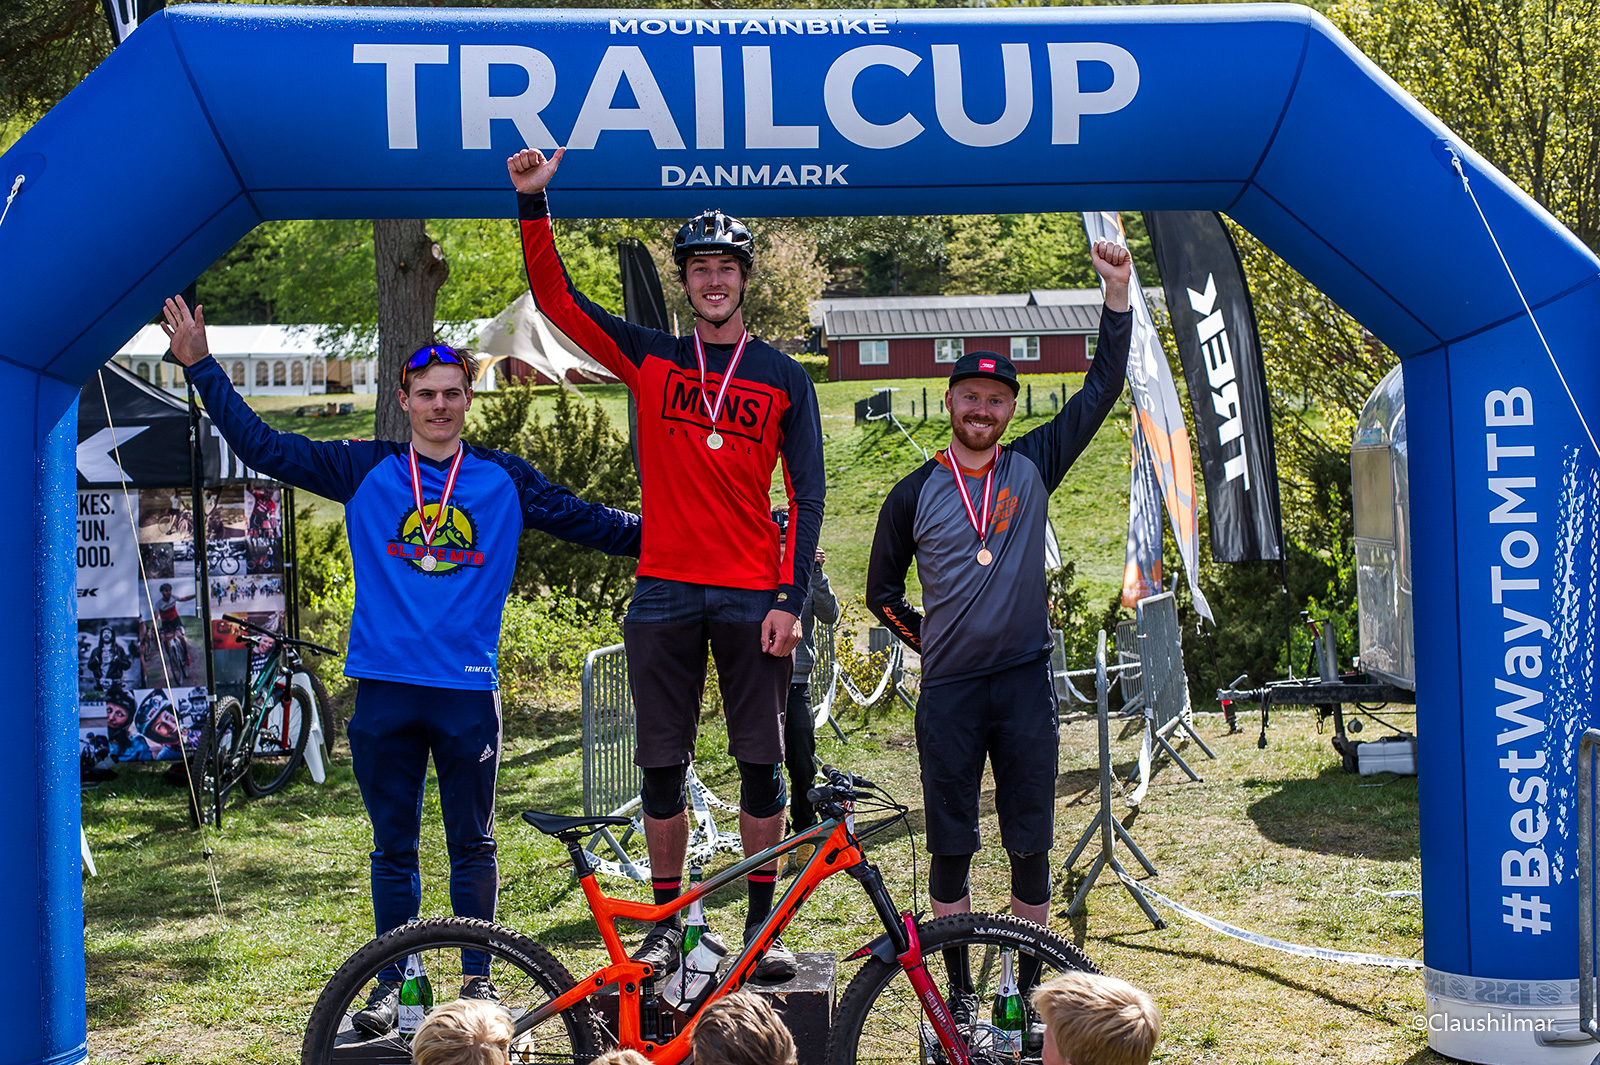 1st place at the mountainbike trailcup 2019 at Himmelbjerget.